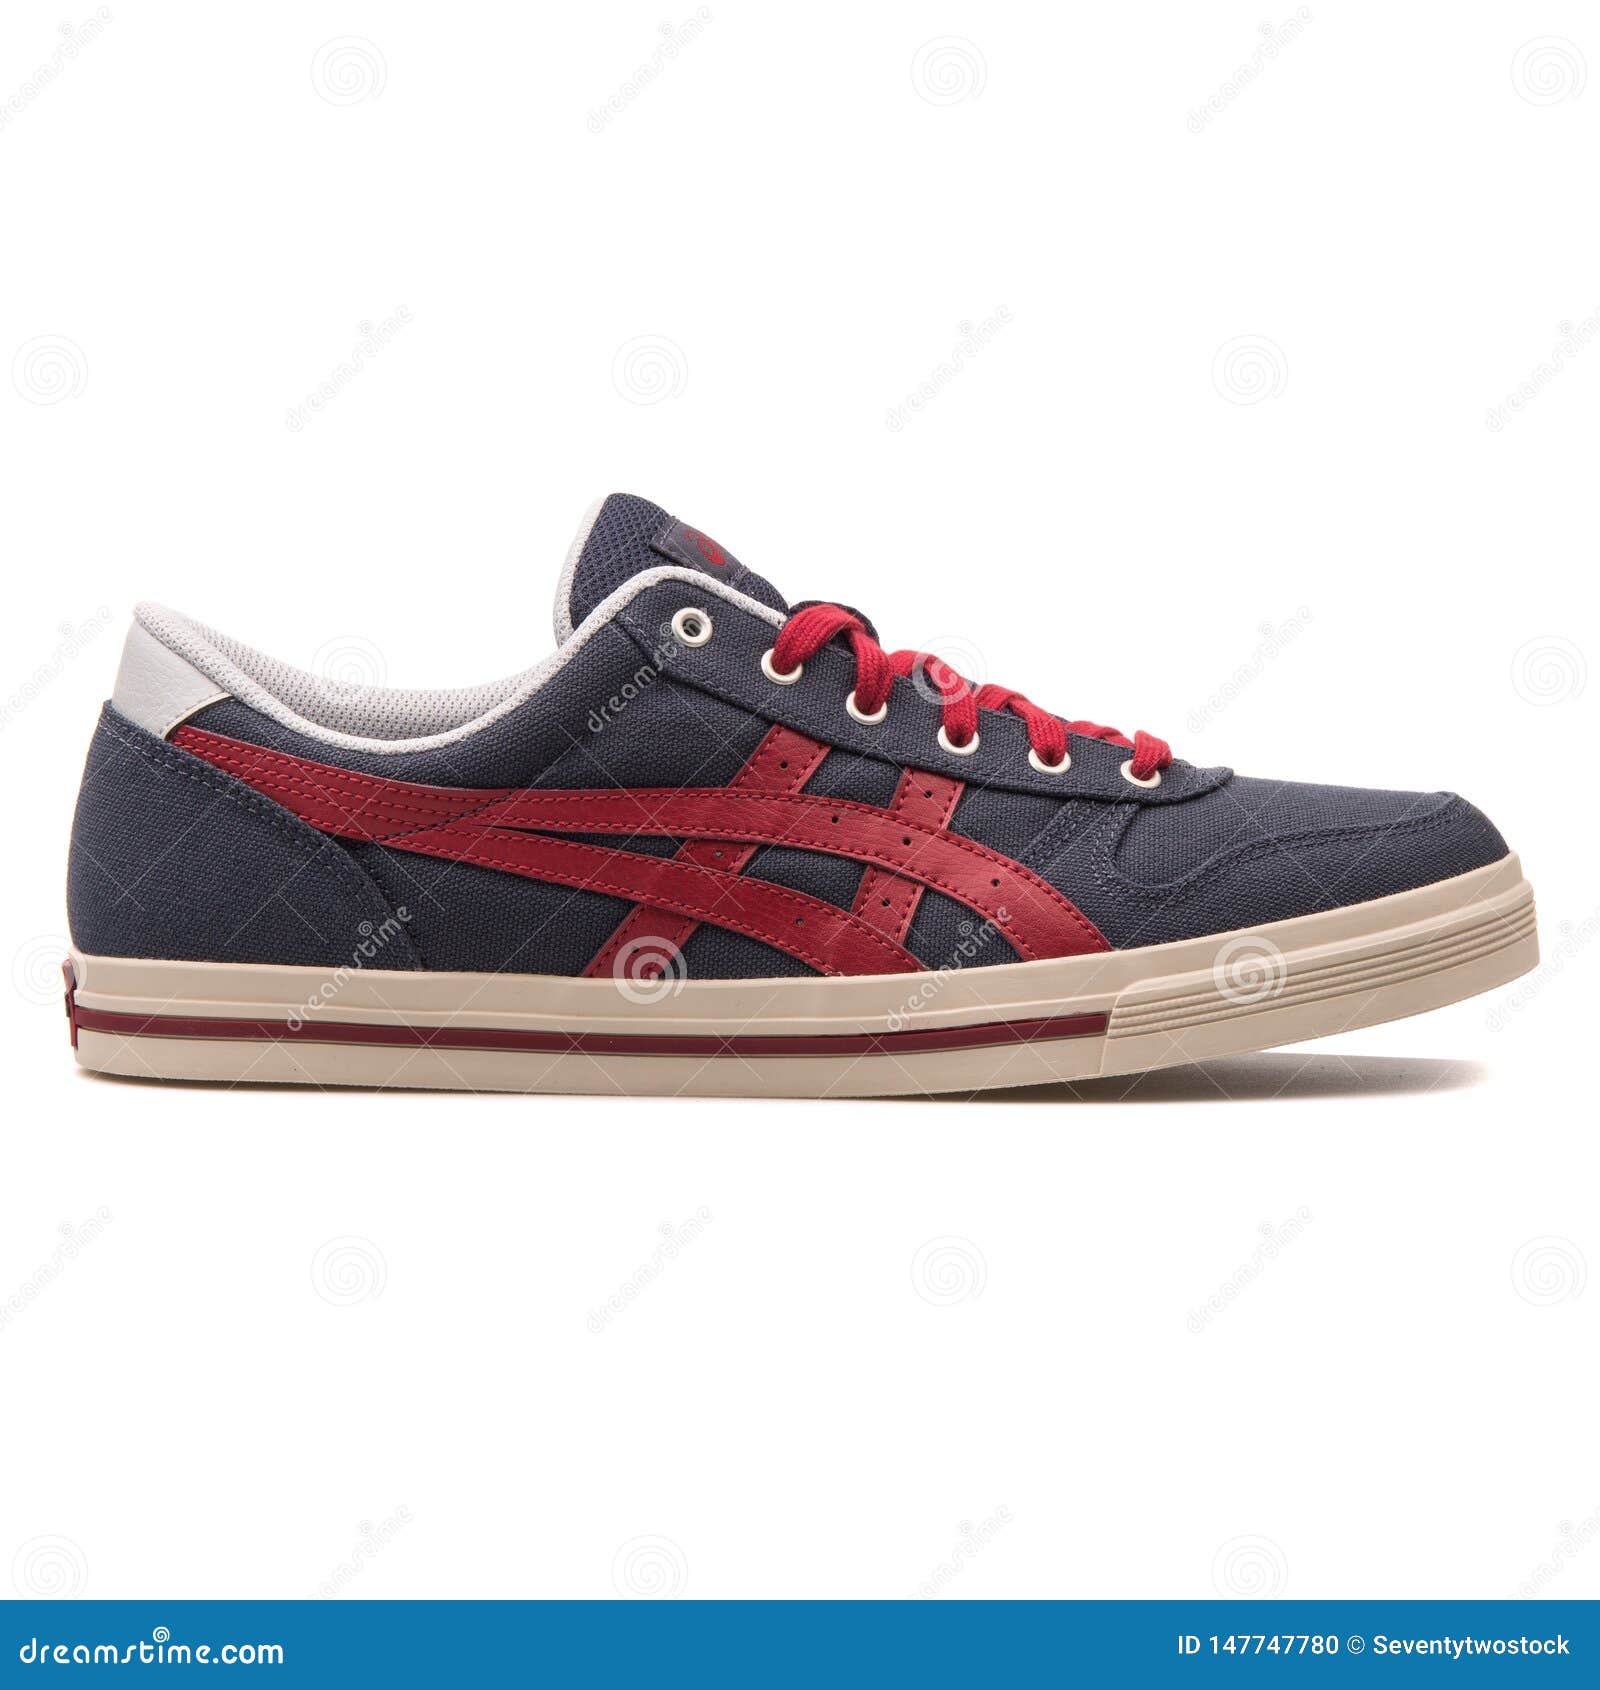 Asics Dark Blue and Burgundy Editorial Image - Image of laces, fitness: 147747780